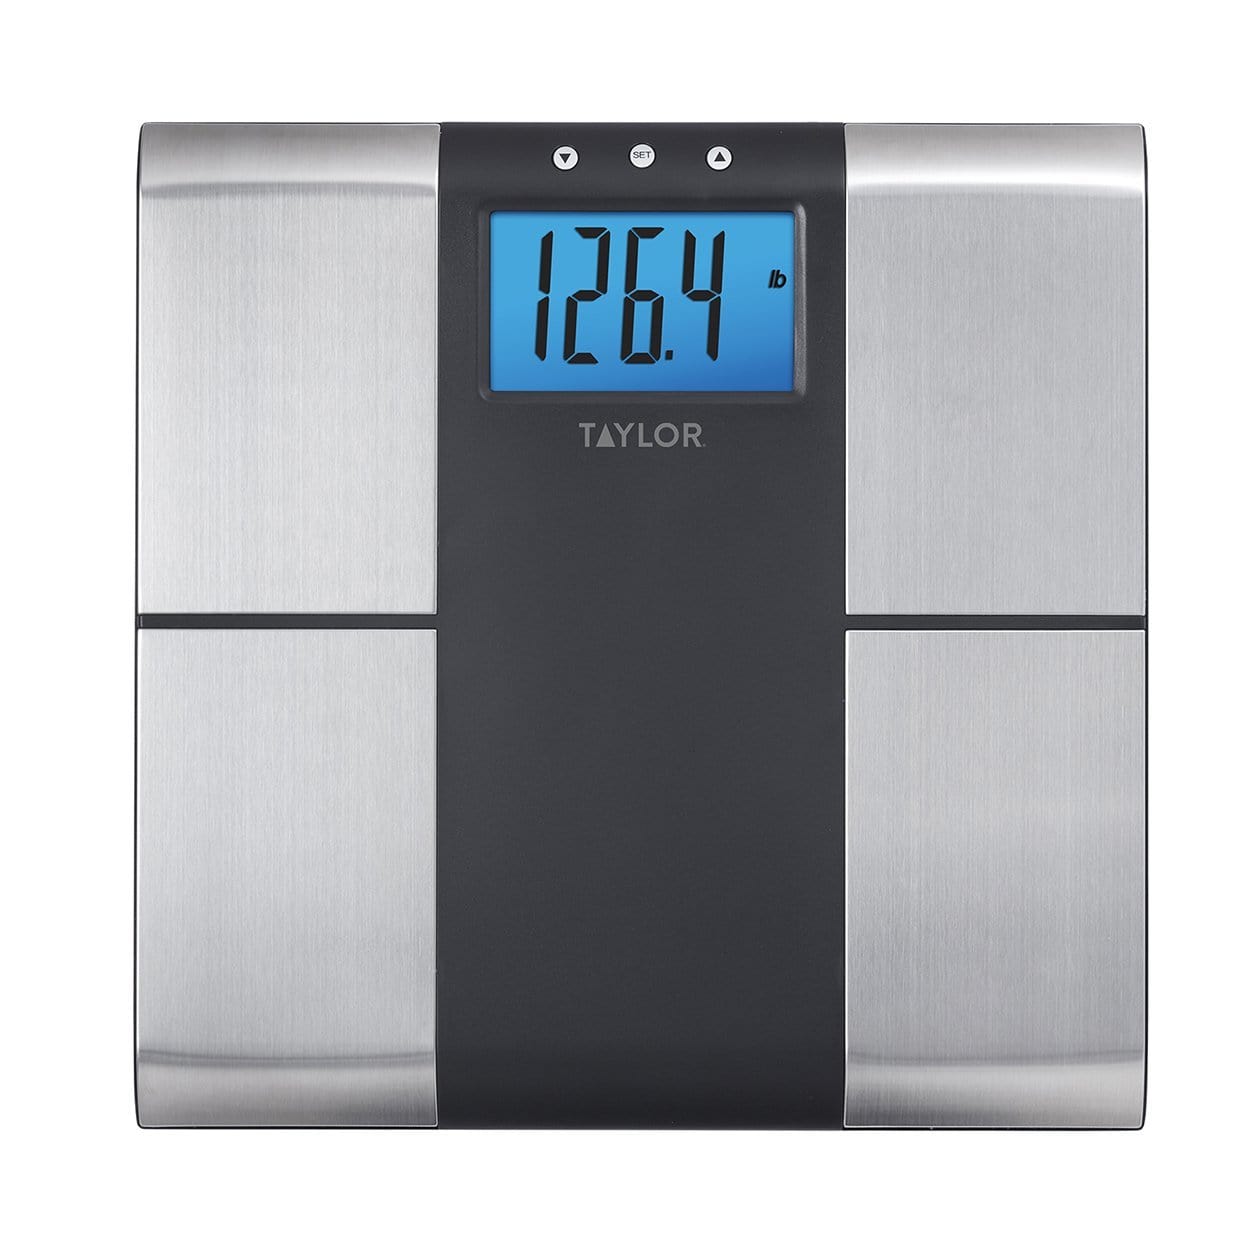 taylor body fat scale 5741 manual